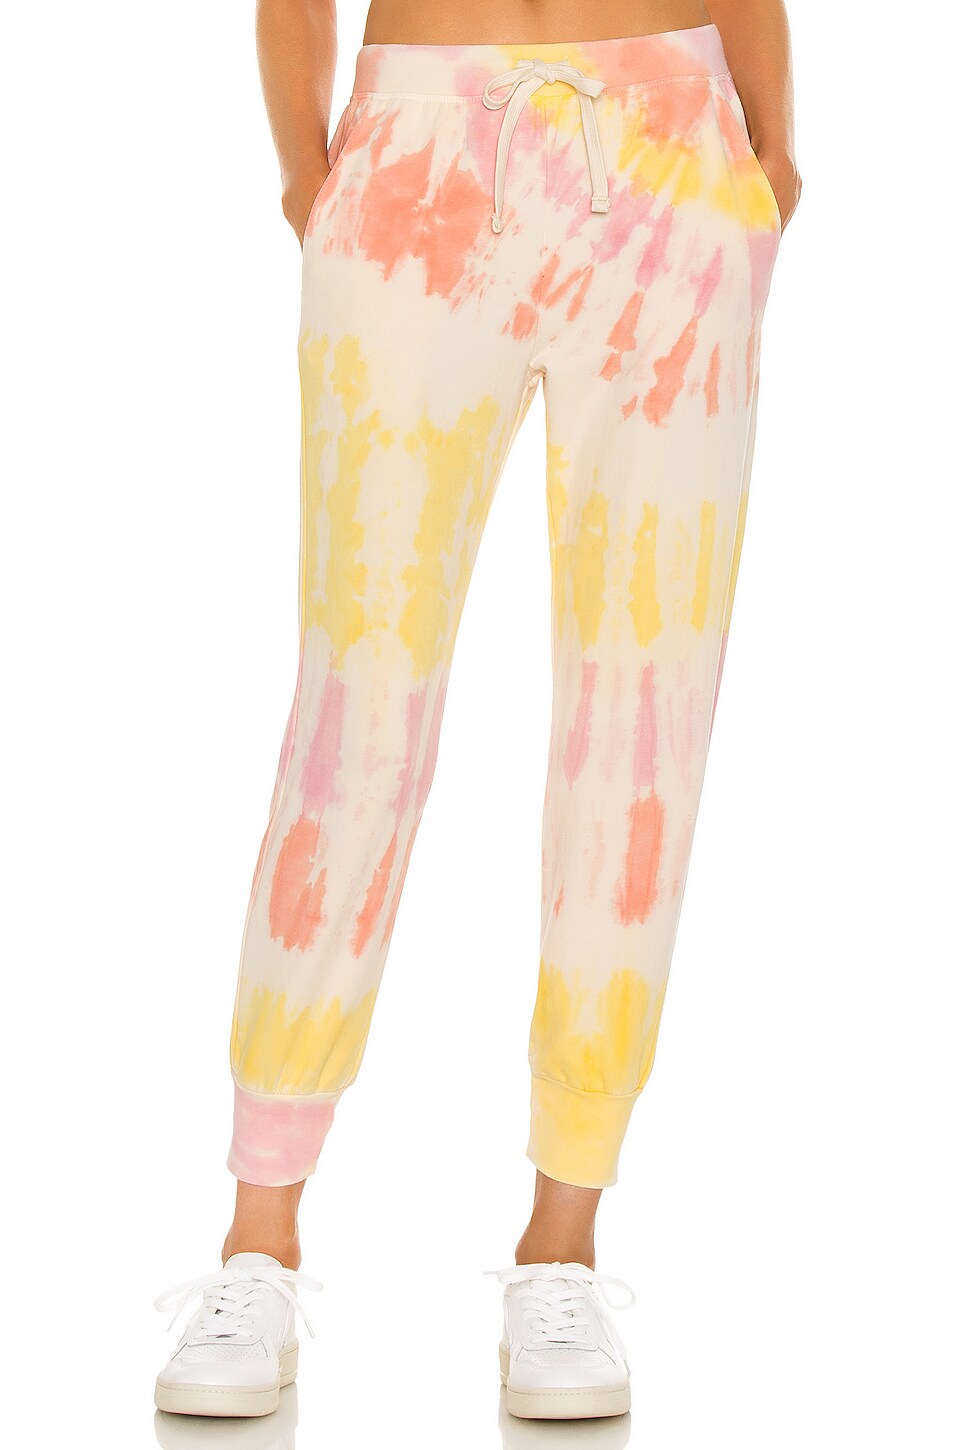 Electric & Rose Abbot Kinney Pant Poppy Pink  Peach & Marigold